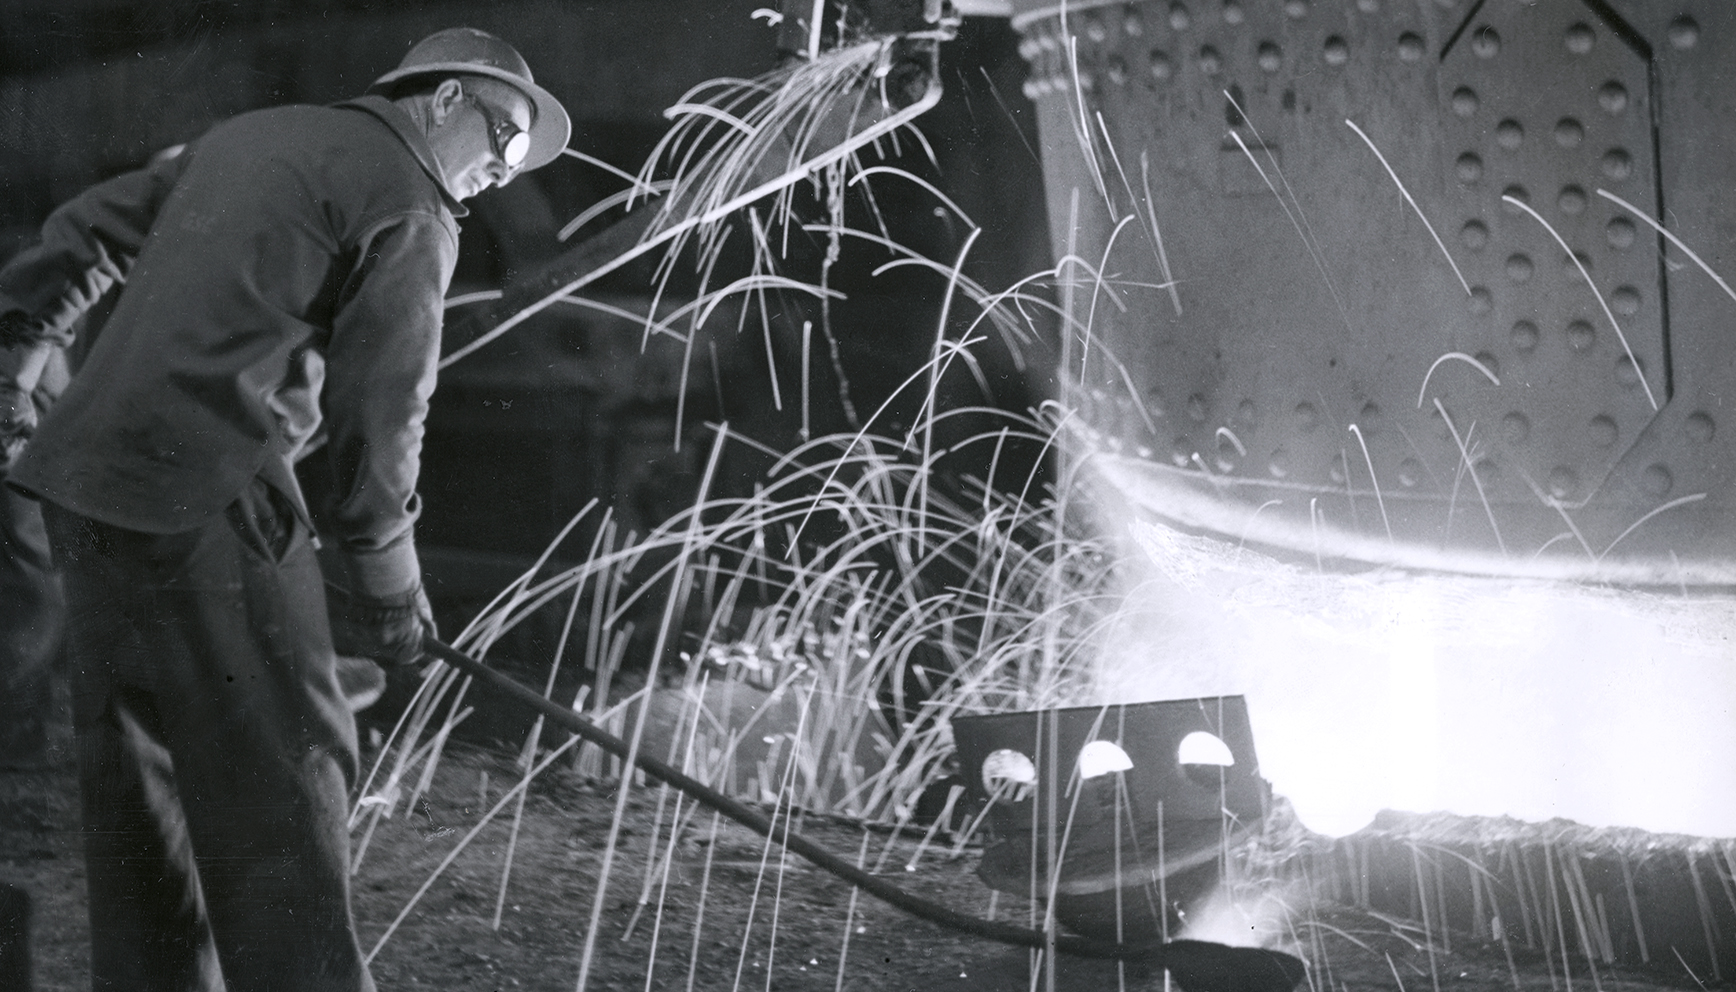 Steelworker near large machinery with sparks